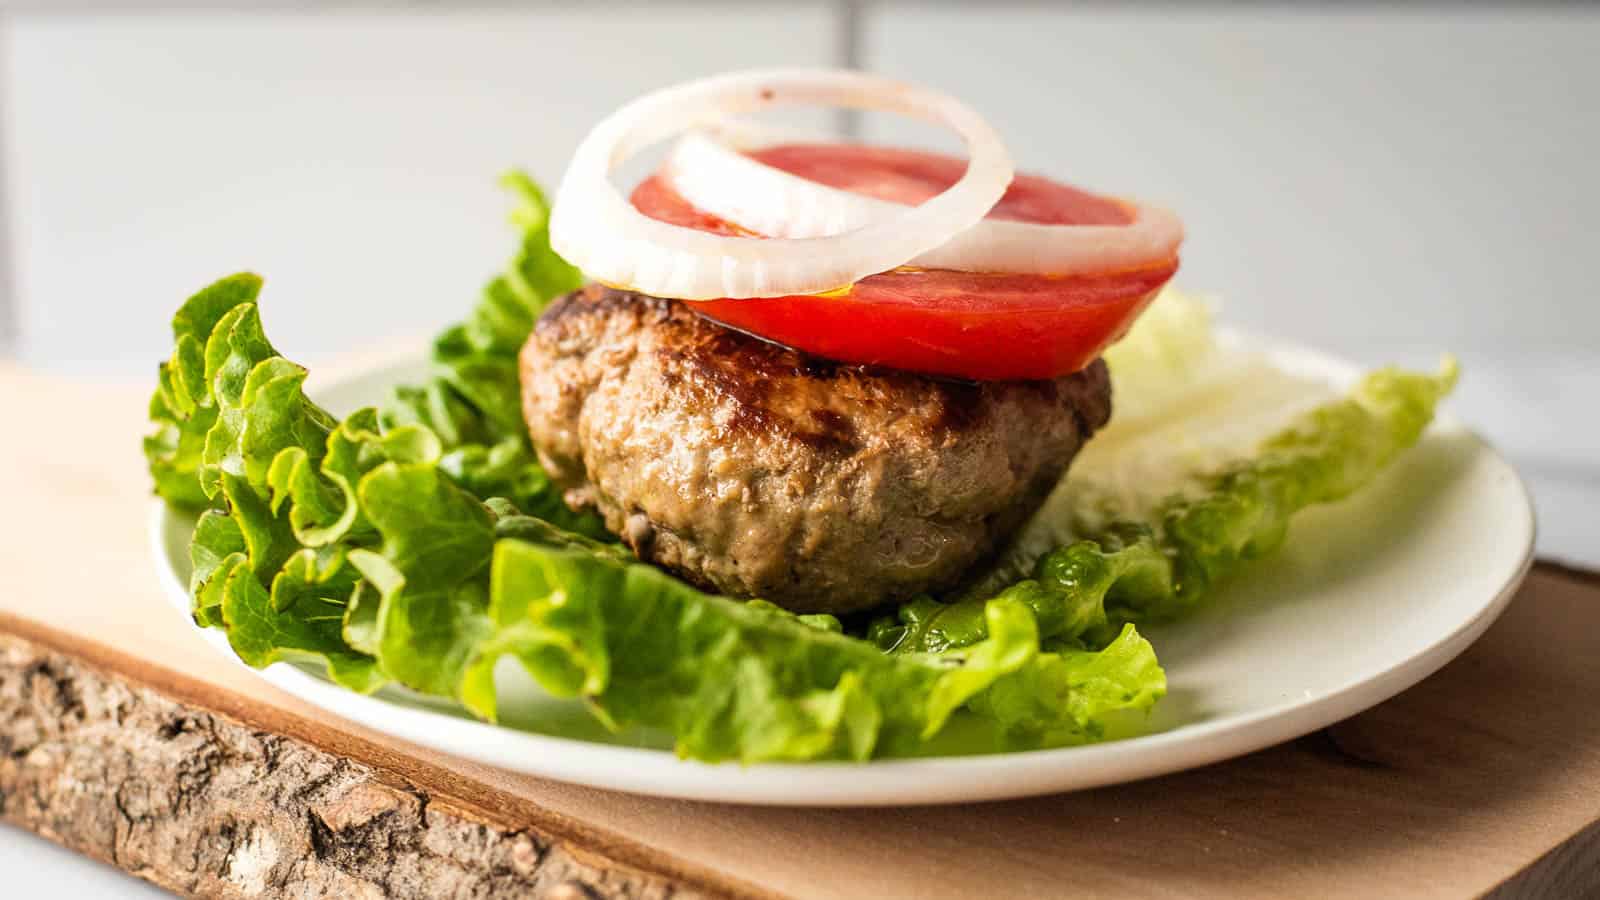 A turkey burger lettuce wrap with tomato and onion on a white plate.